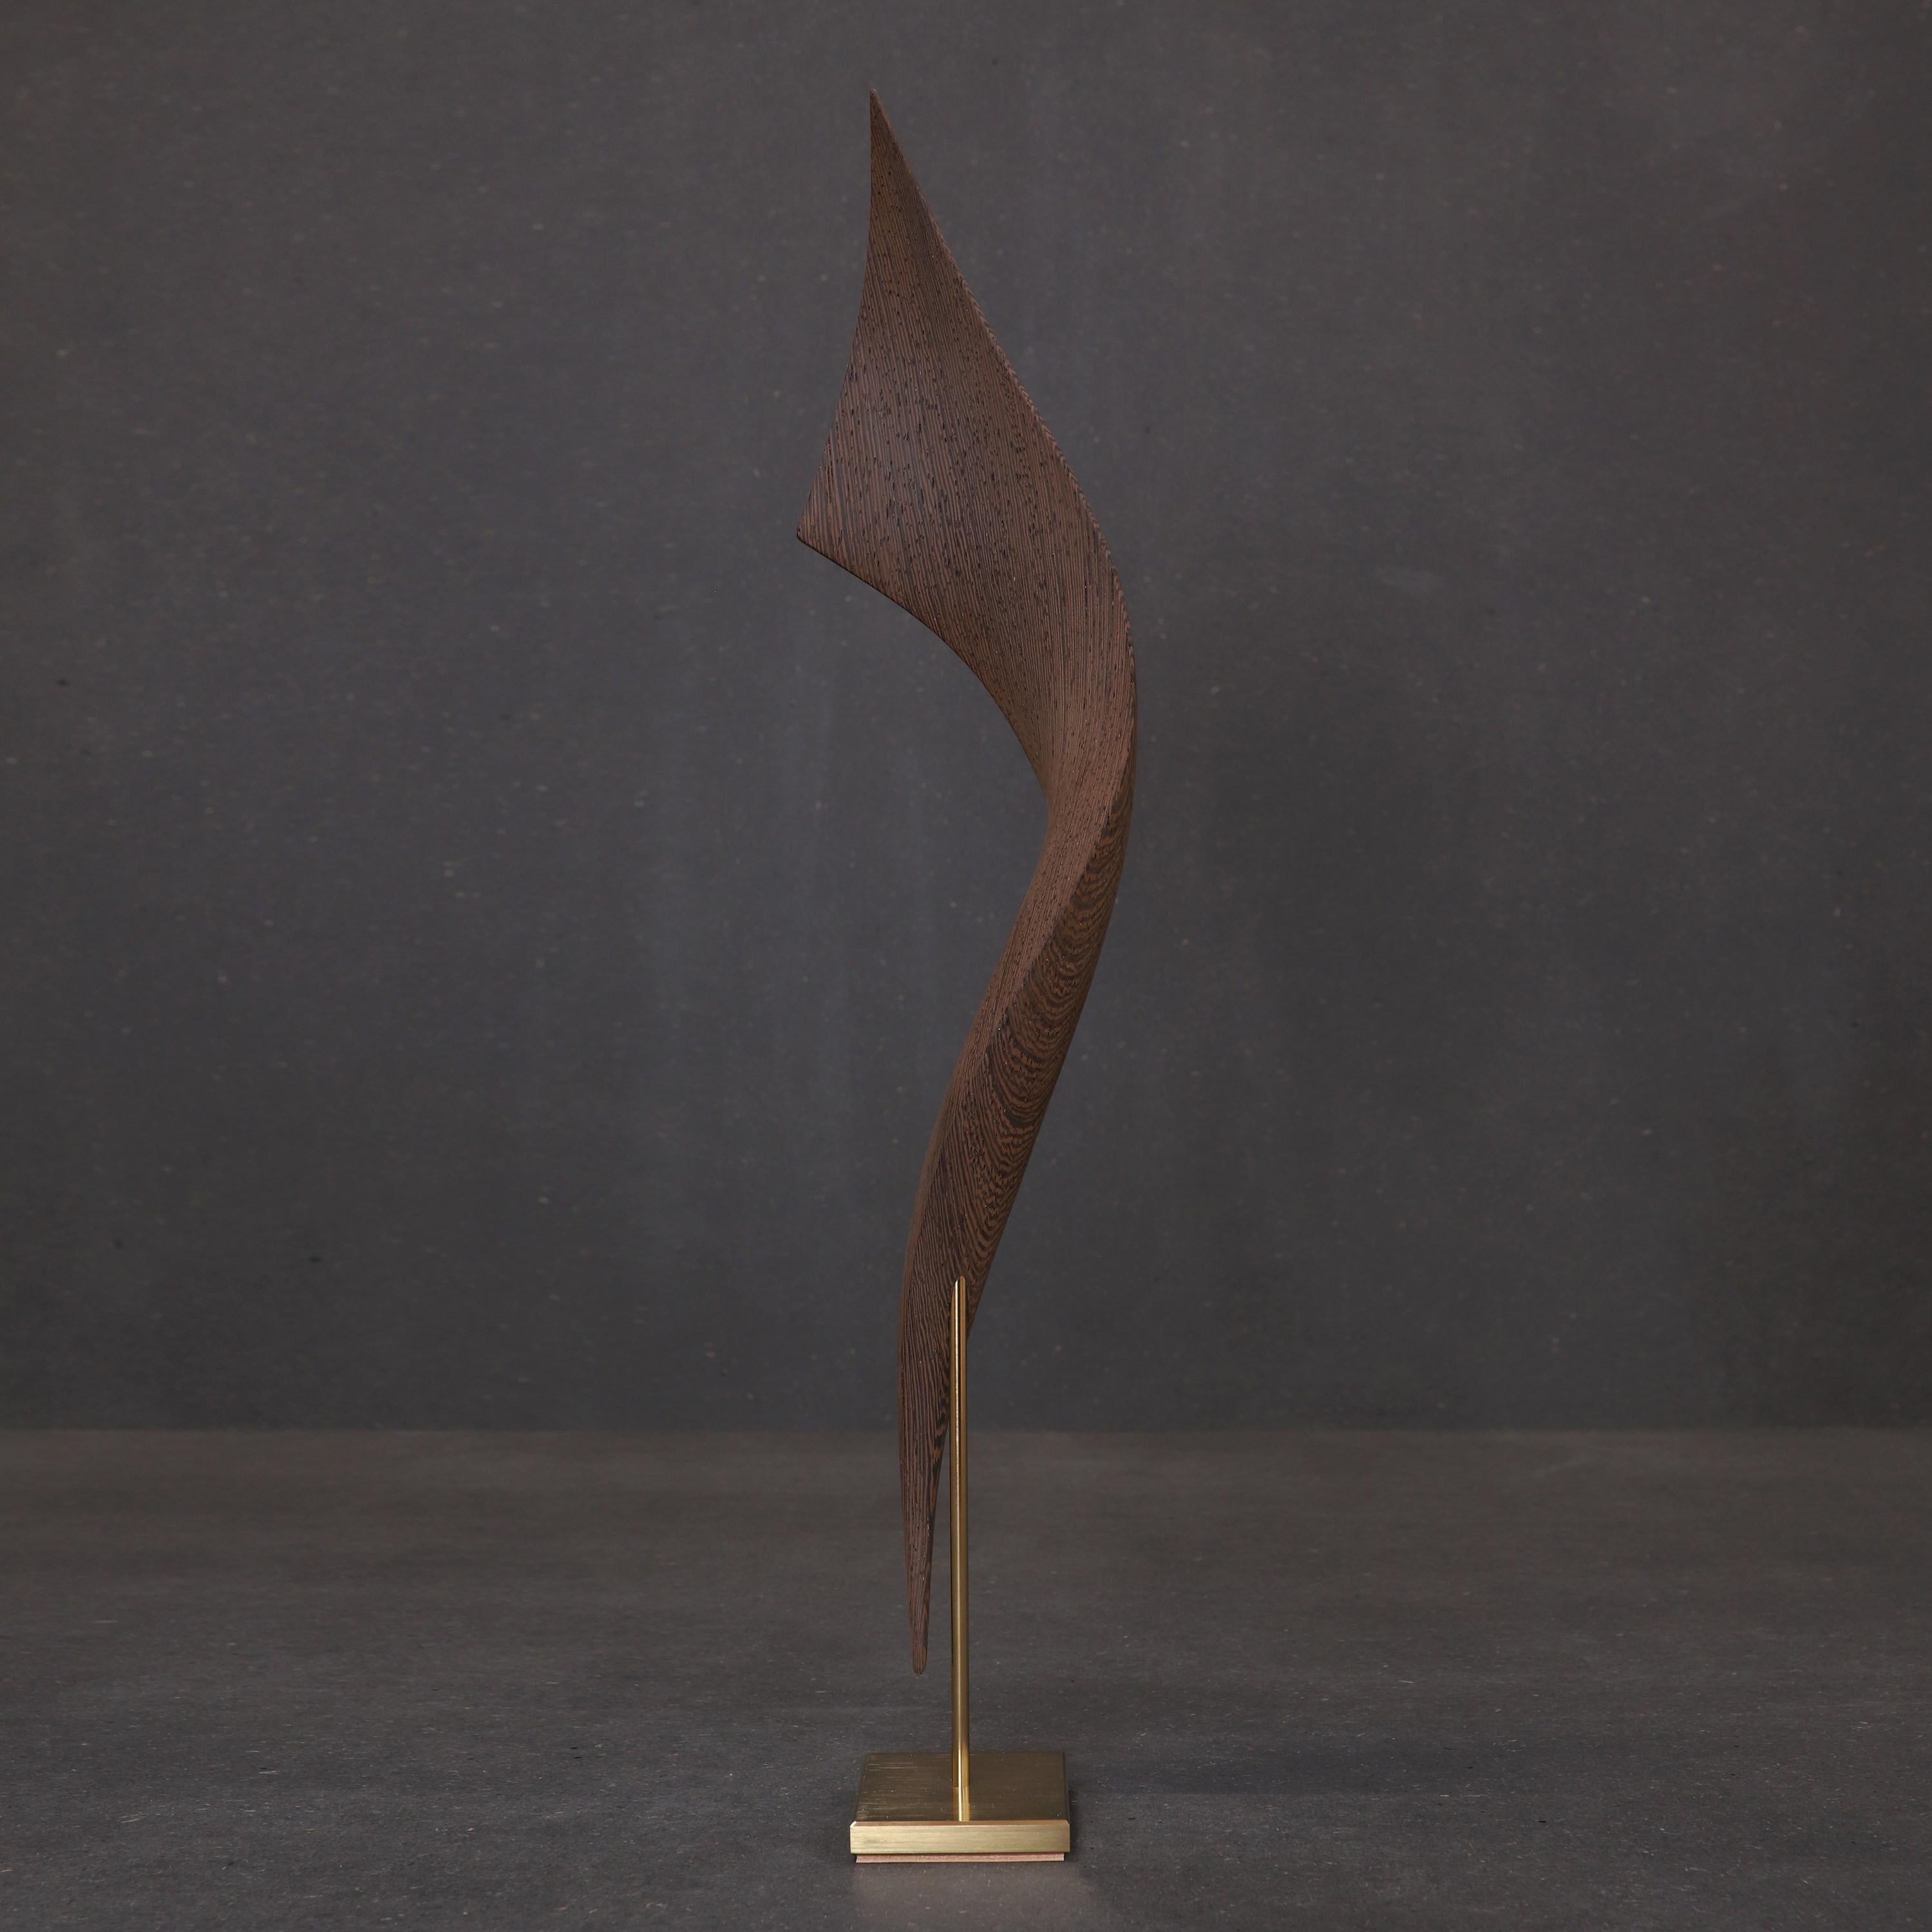  Flow Petit No 20, abstract fluid Wenge wood & gold mounted sculpture by Egeværk For Sale 1